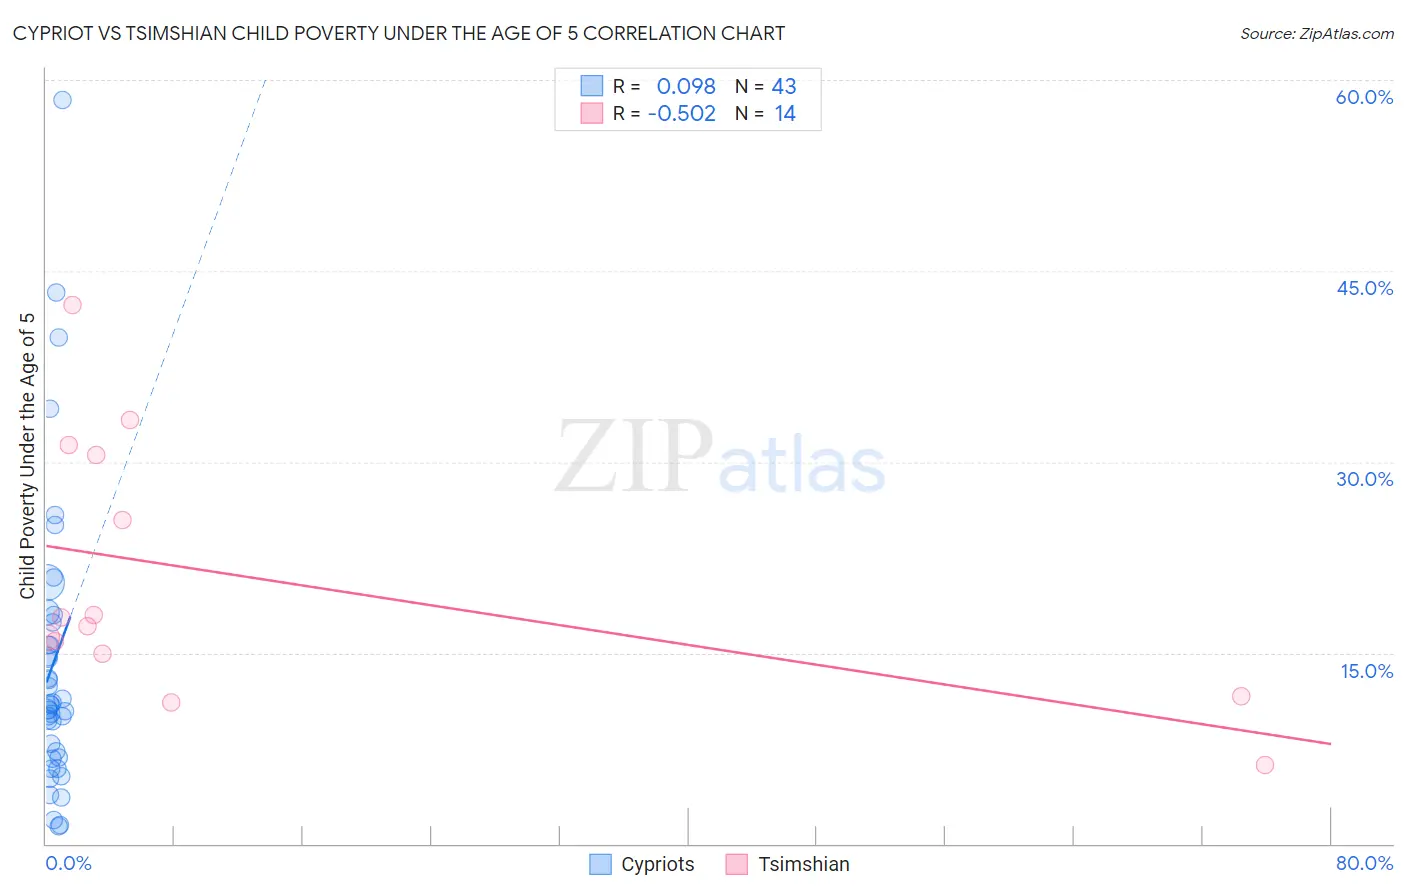 Cypriot vs Tsimshian Child Poverty Under the Age of 5